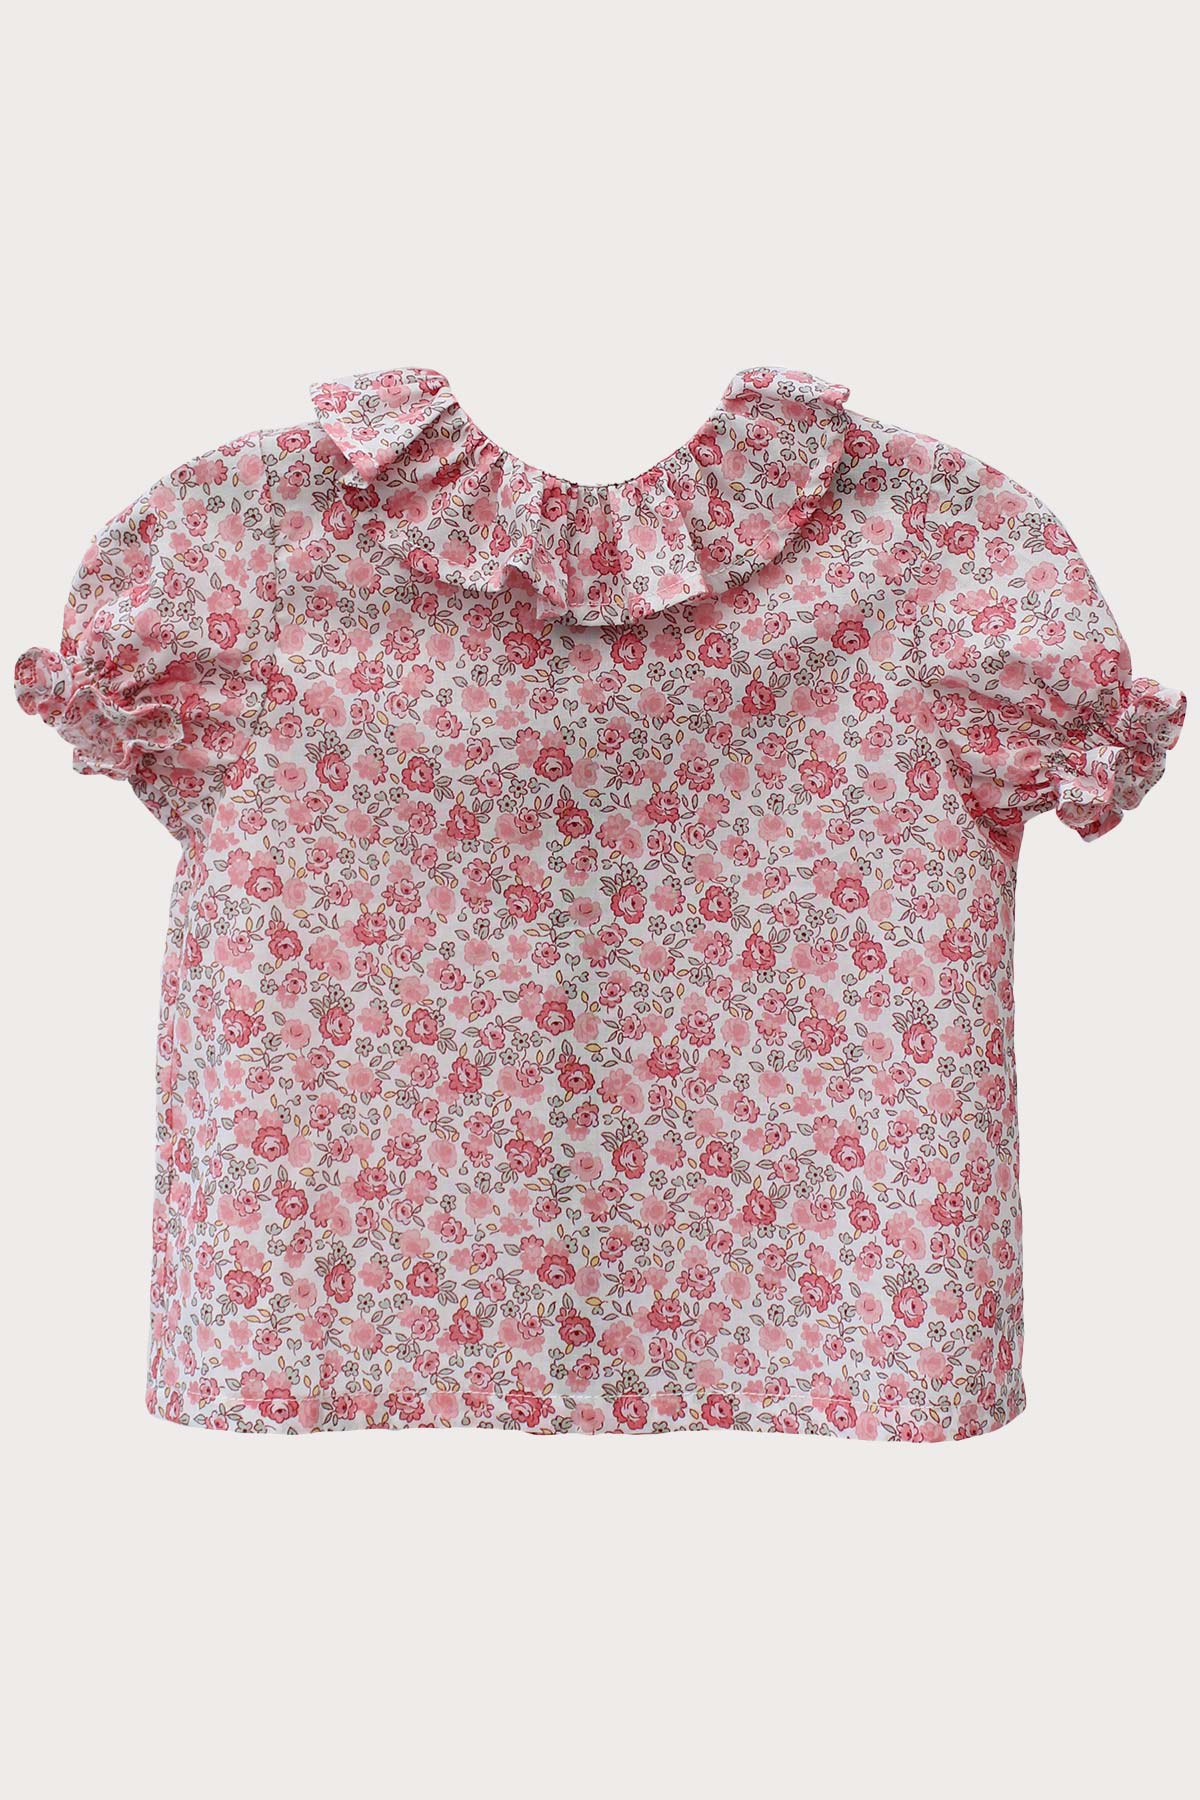 Organic Cotton Floral Baby Blouse - 6 Months to 5 Years